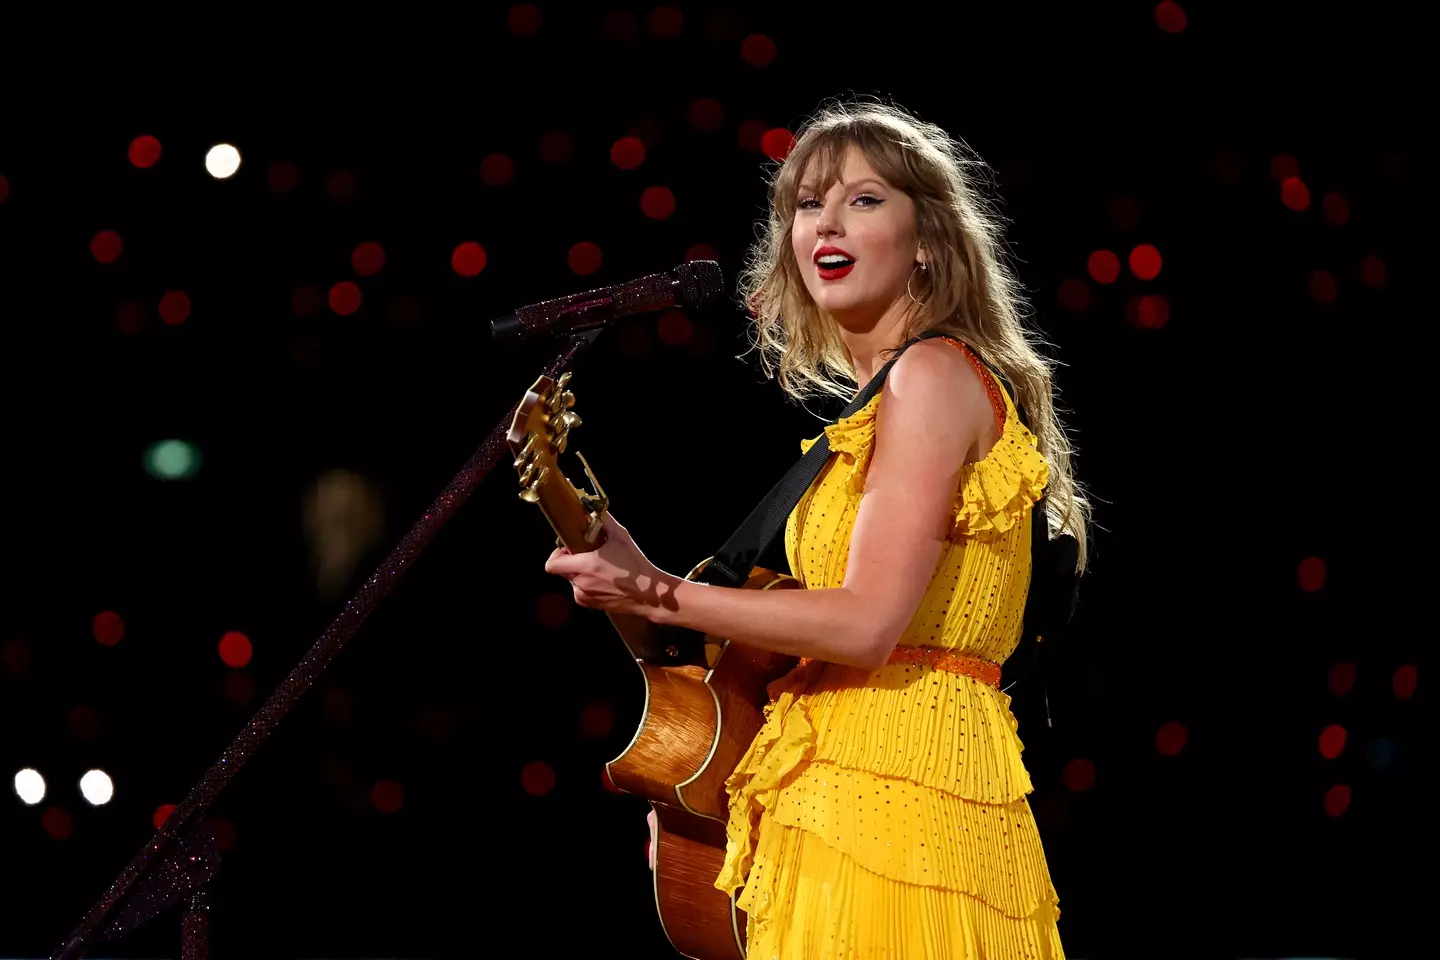 Taylor Swift performed in Melbourne over the weekend.